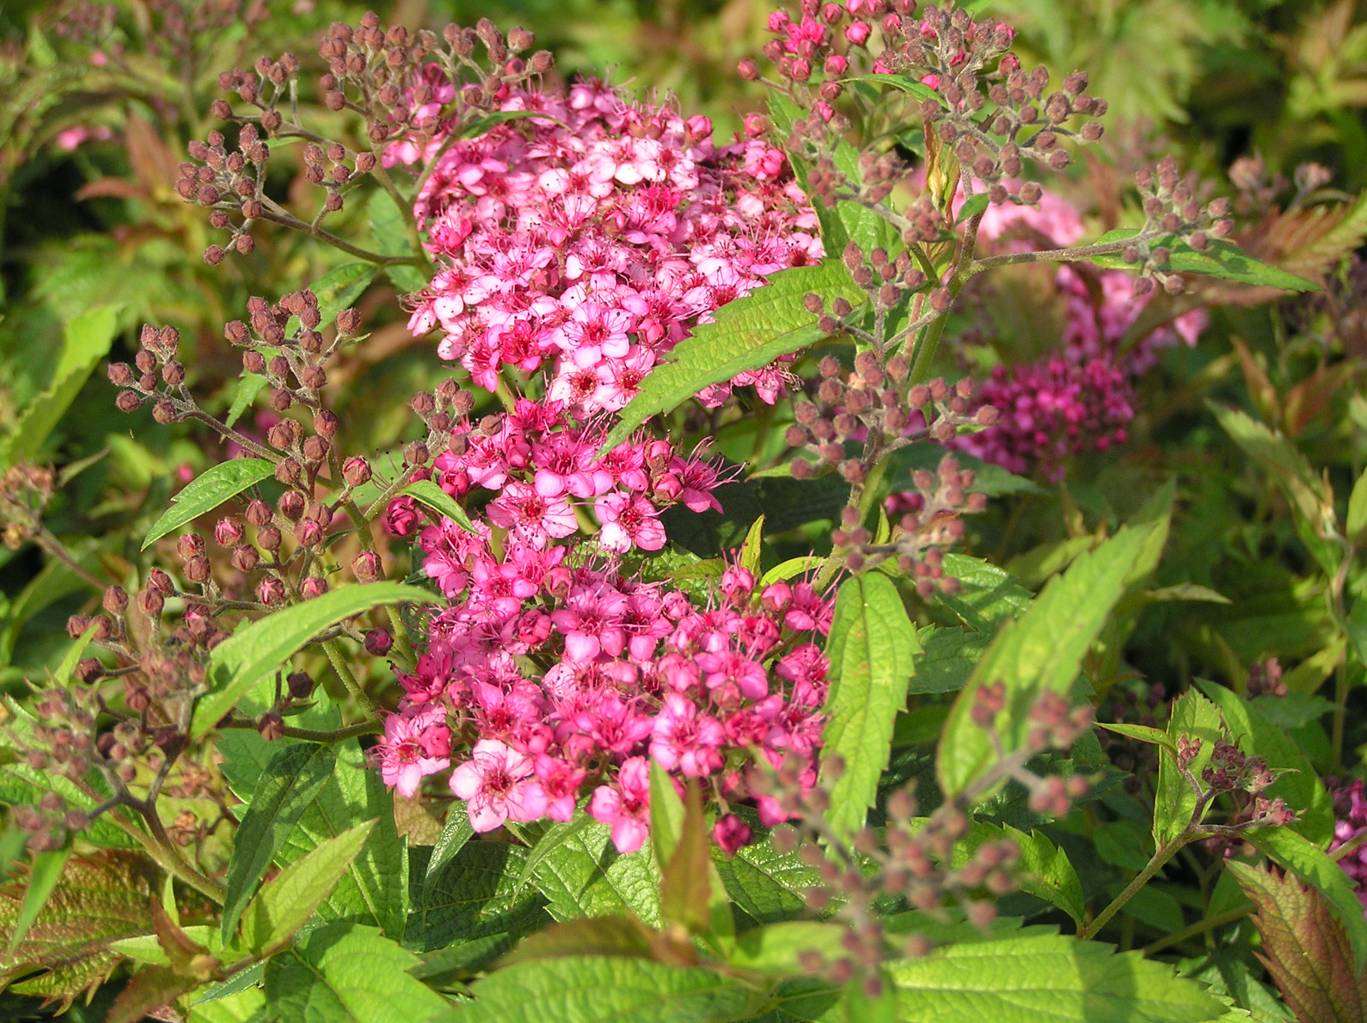 Tawuła japońska "Country Red" / Spiraea japonica "Country Red"